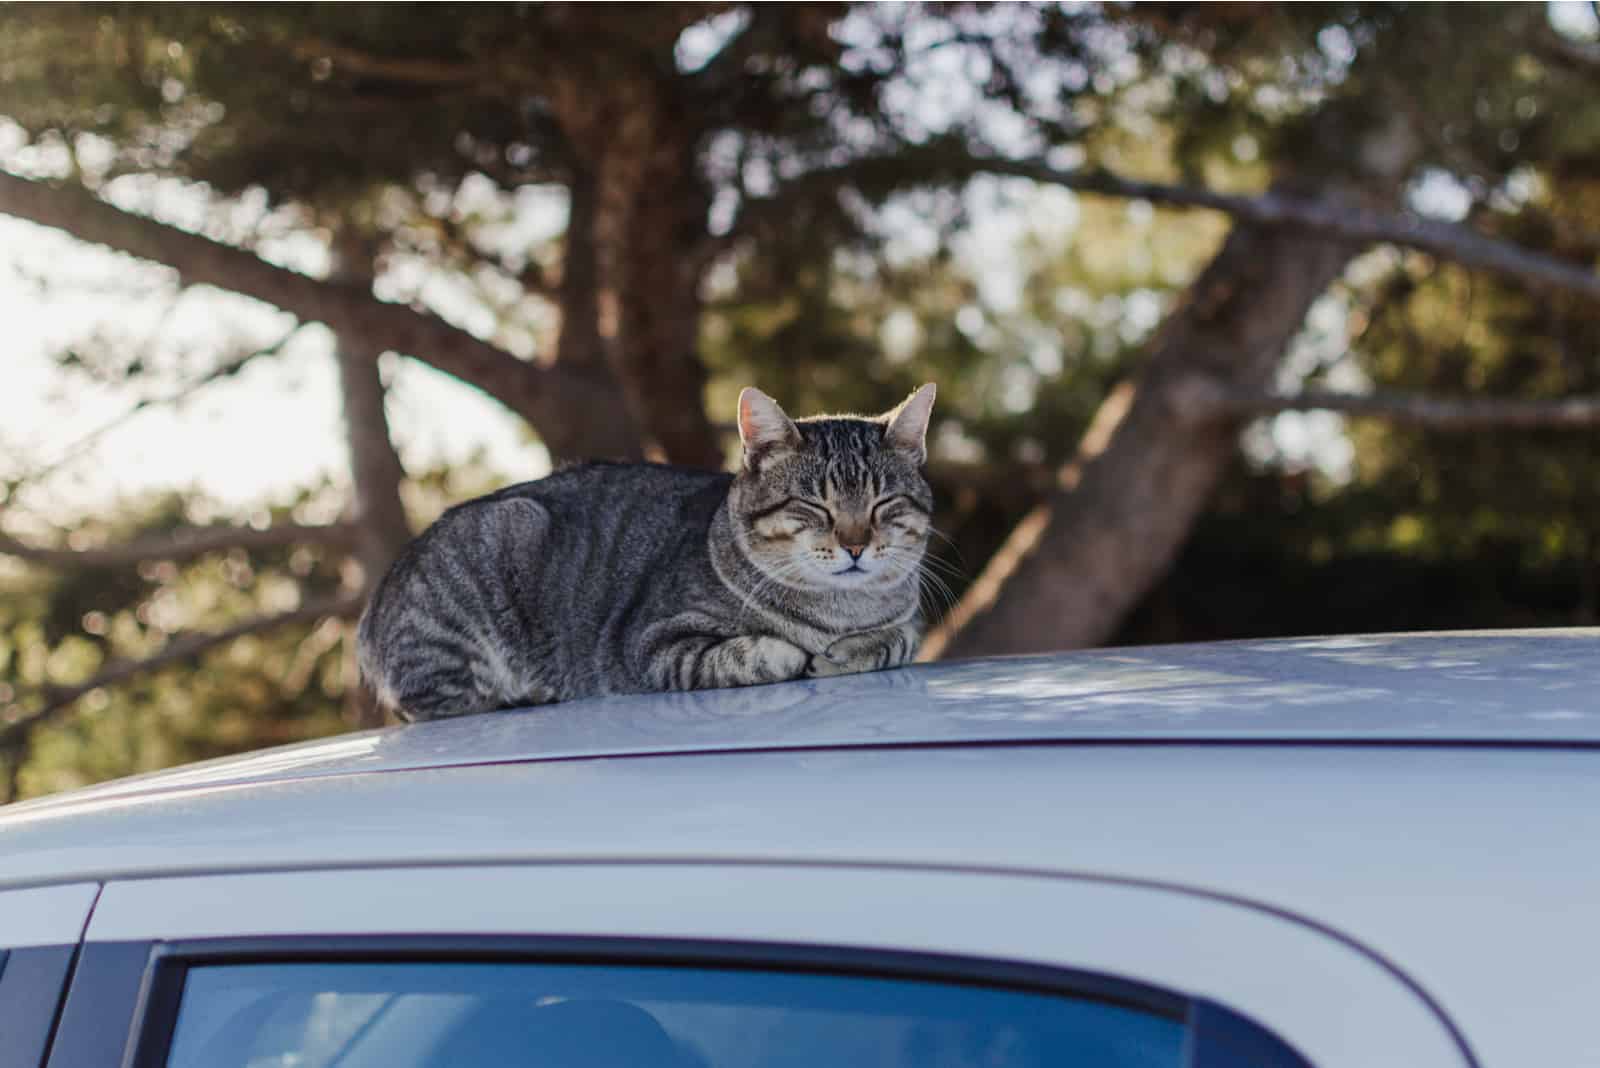 the cat sits in the car and sleeps